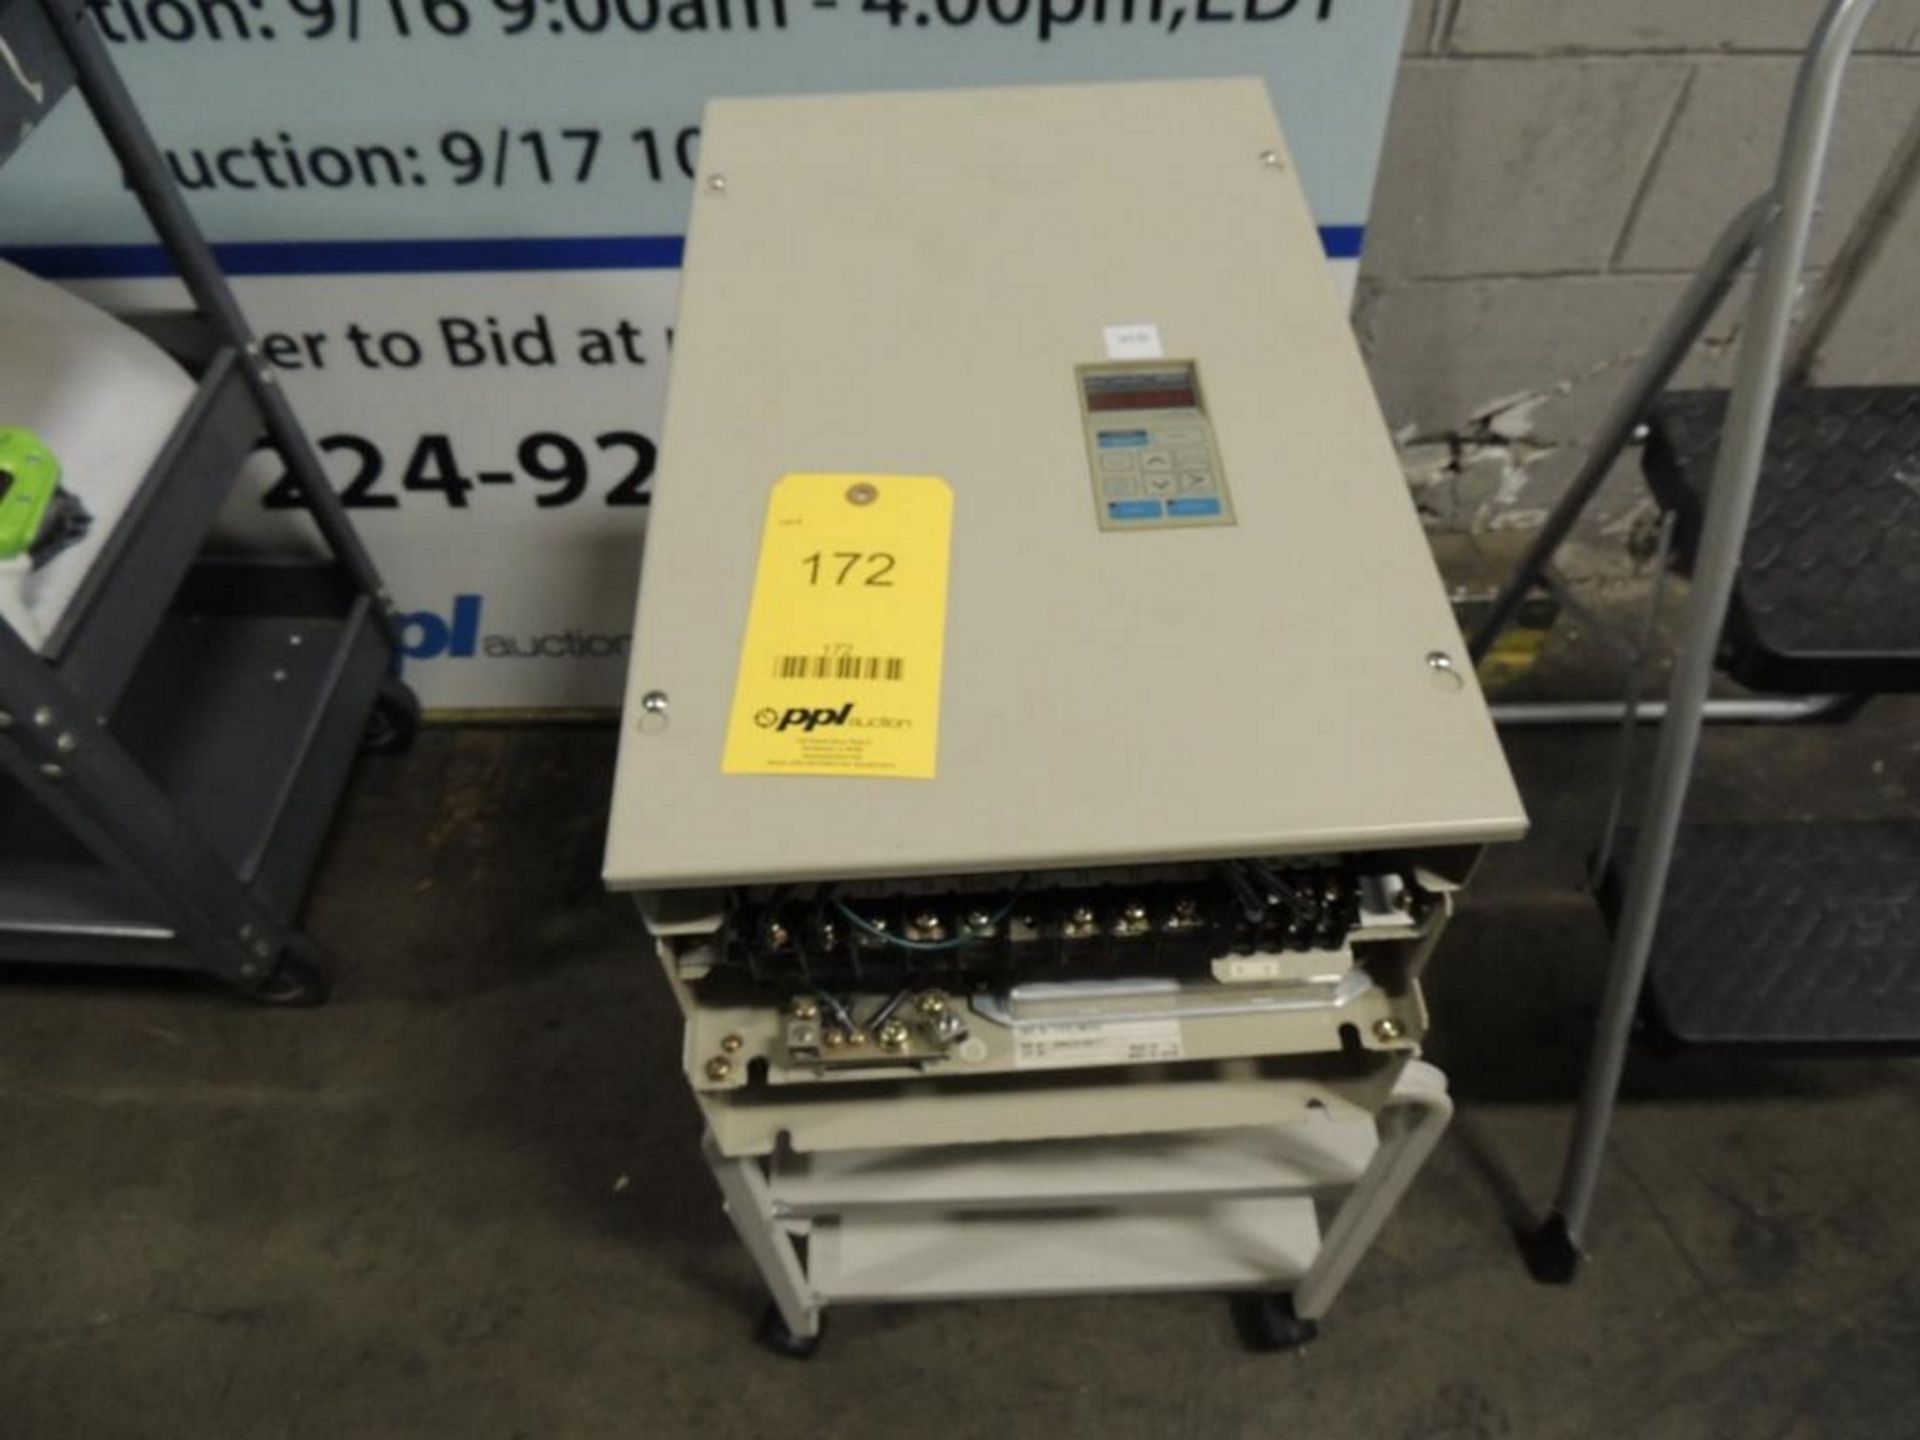 Magnatek Vcd703-Bo3o Variable Frequency Drive For Medium Open End Envelope Machine - Image 2 of 6